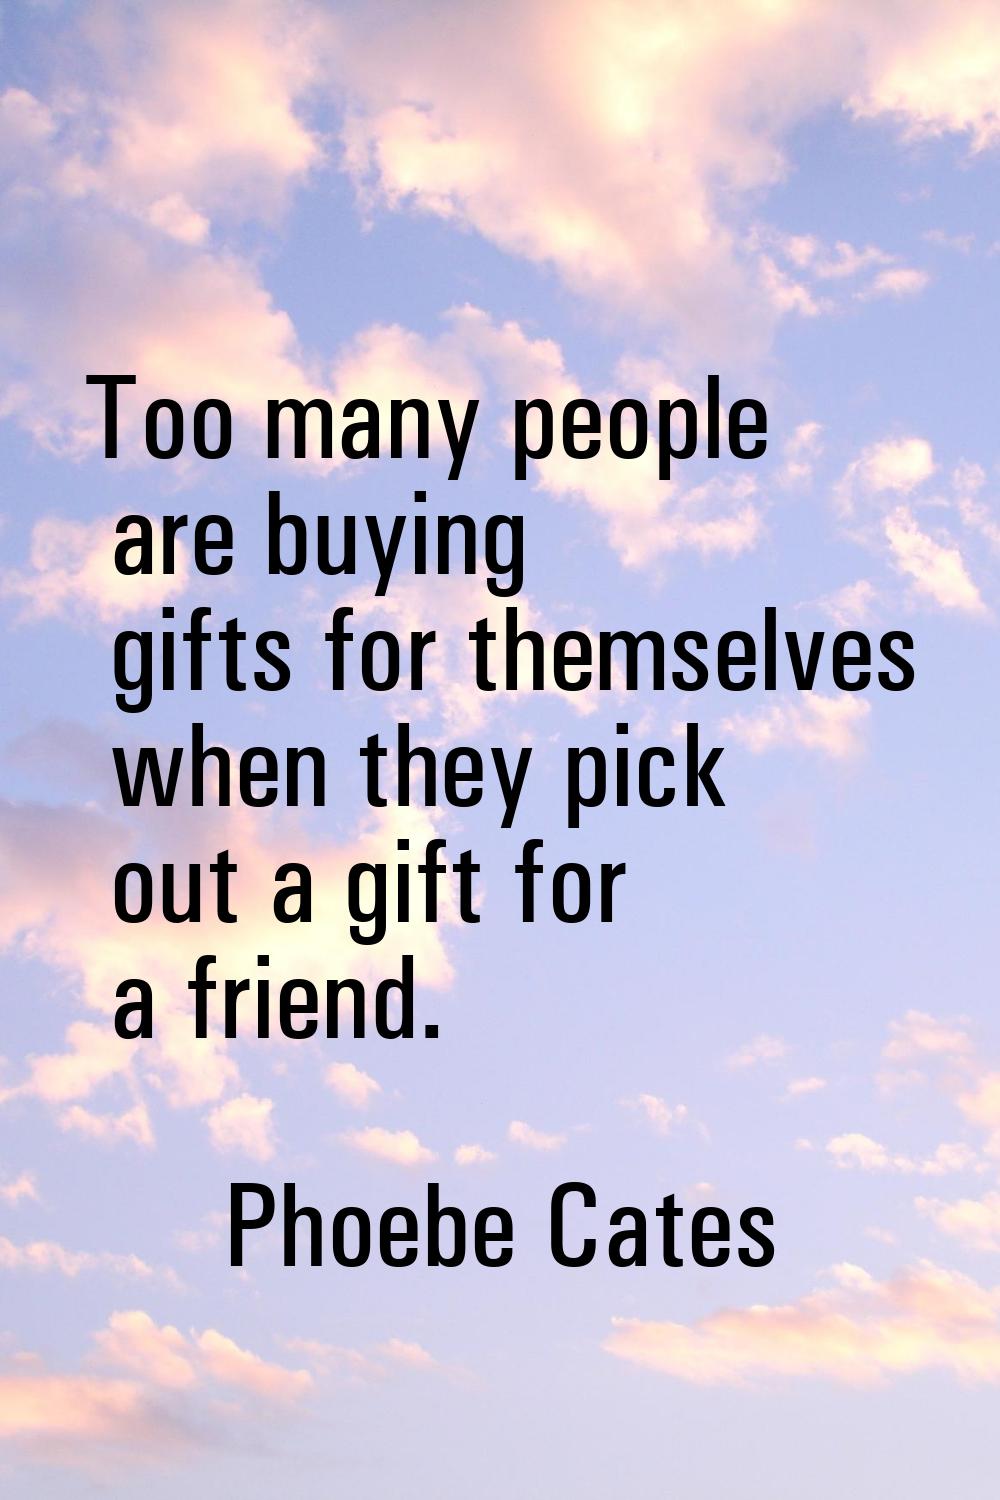 Too many people are buying gifts for themselves when they pick out a gift for a friend.